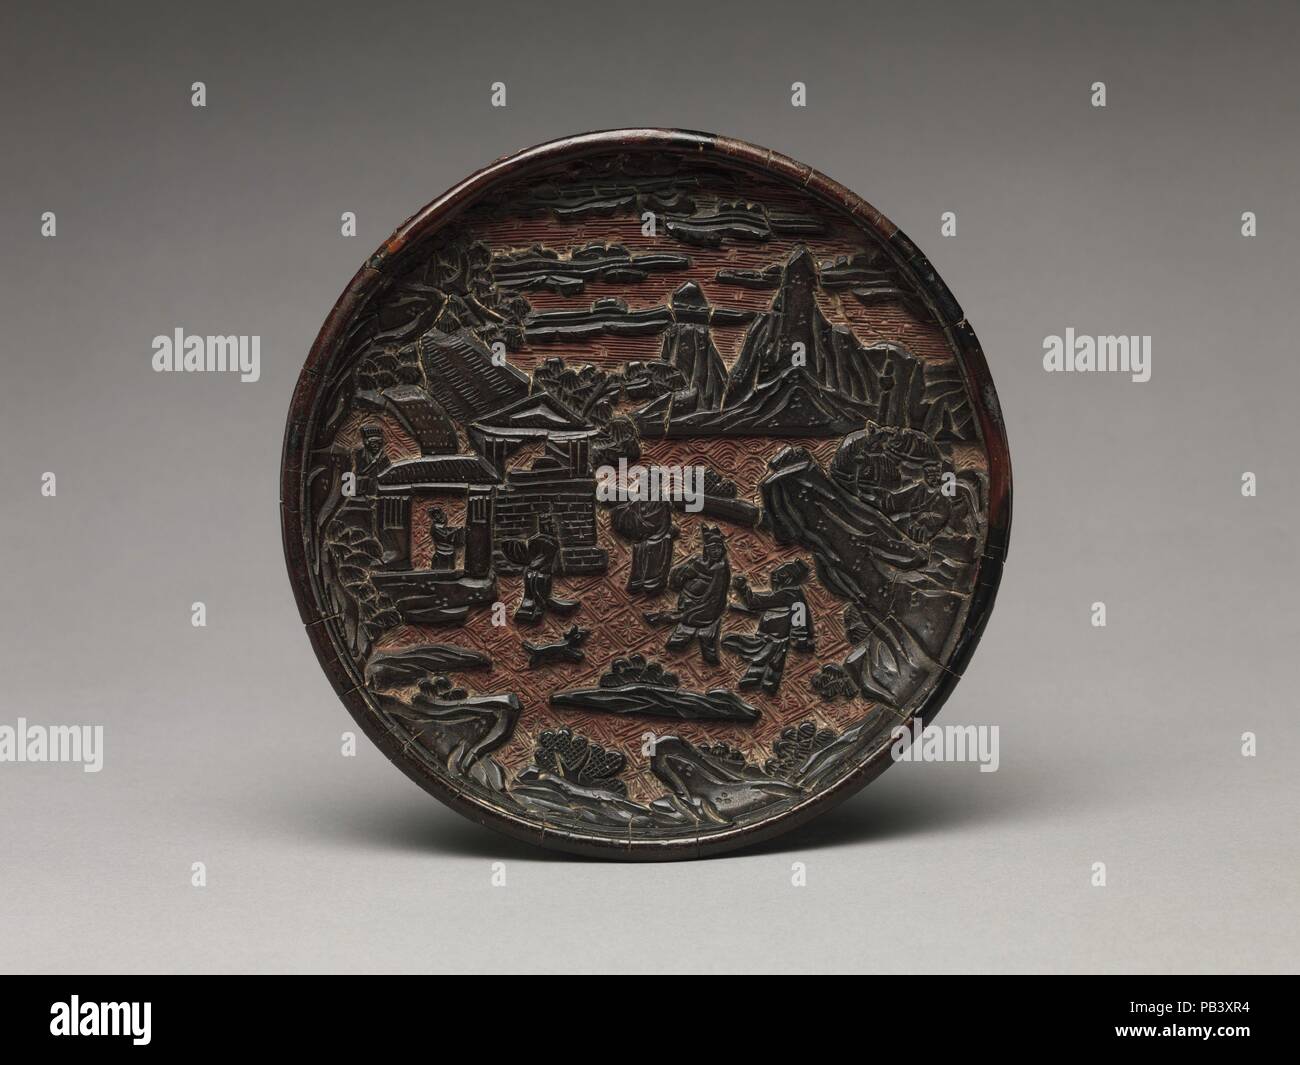 Pair of Dishes with Scenes from the Romance of the Three Kingdoms. Culture: China. Dimensions: Each: Diam. 6 in. (15.2 cm). Date: late 14th century.  The narrative scenes on this pair of dishes derive from Chinese history. At the center of one of the dishes, three figures stand before a hut. They are most likely Liu Bei and his two brothers, visiting the learned scholar Zhuge Liang. Liu Bei was the founder of one of the primary polities in China during the Three Kingdoms period (220-65), a tumultuous era that plays a prominent role in Chinese literature. It is likely that the scene was derived Stock Photo